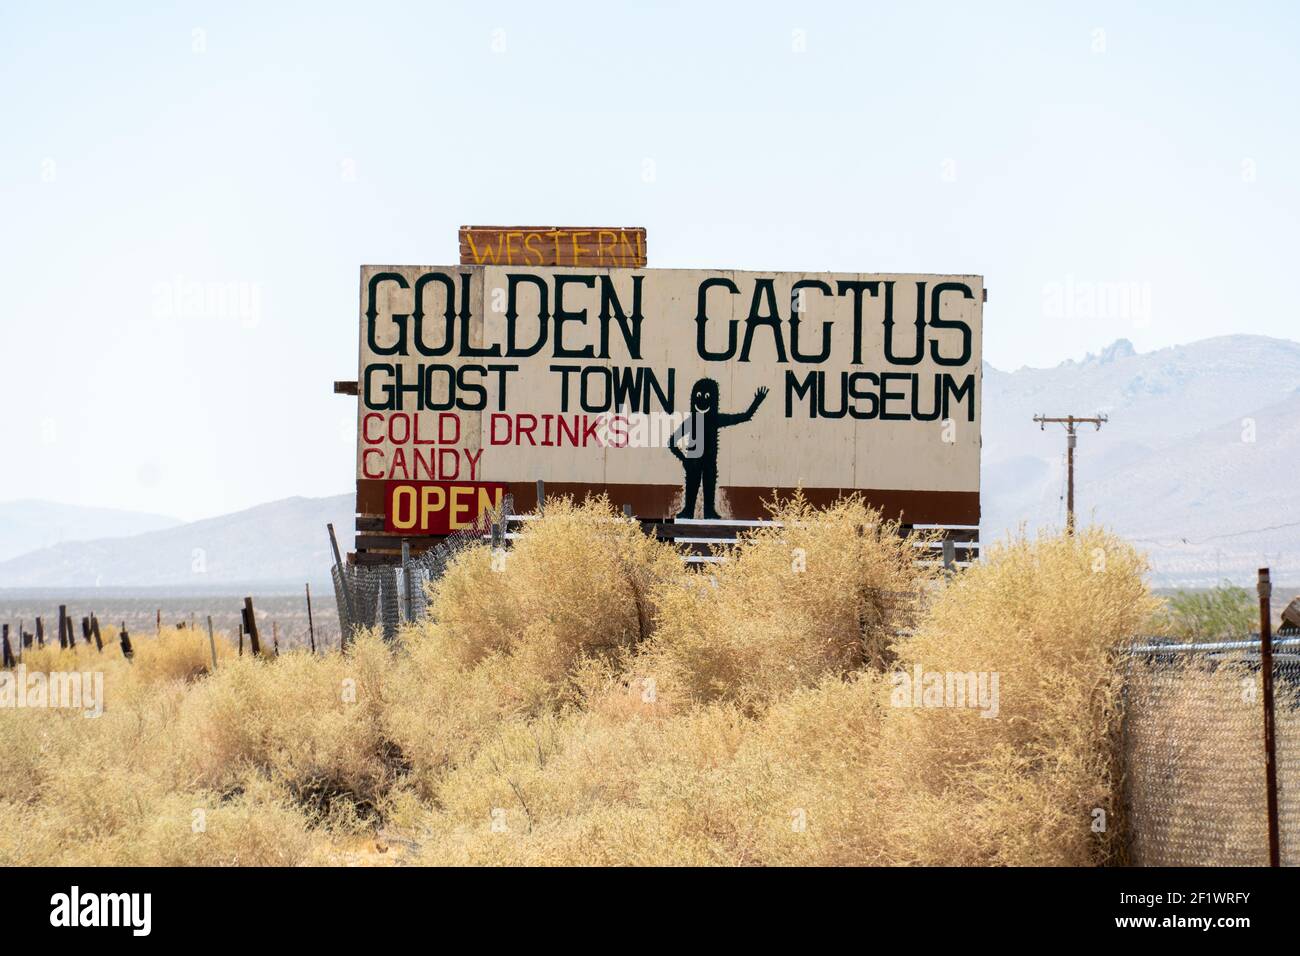 The Golden Cactus, Ghost Town  Museum in Pearsonville, California Stock Photo